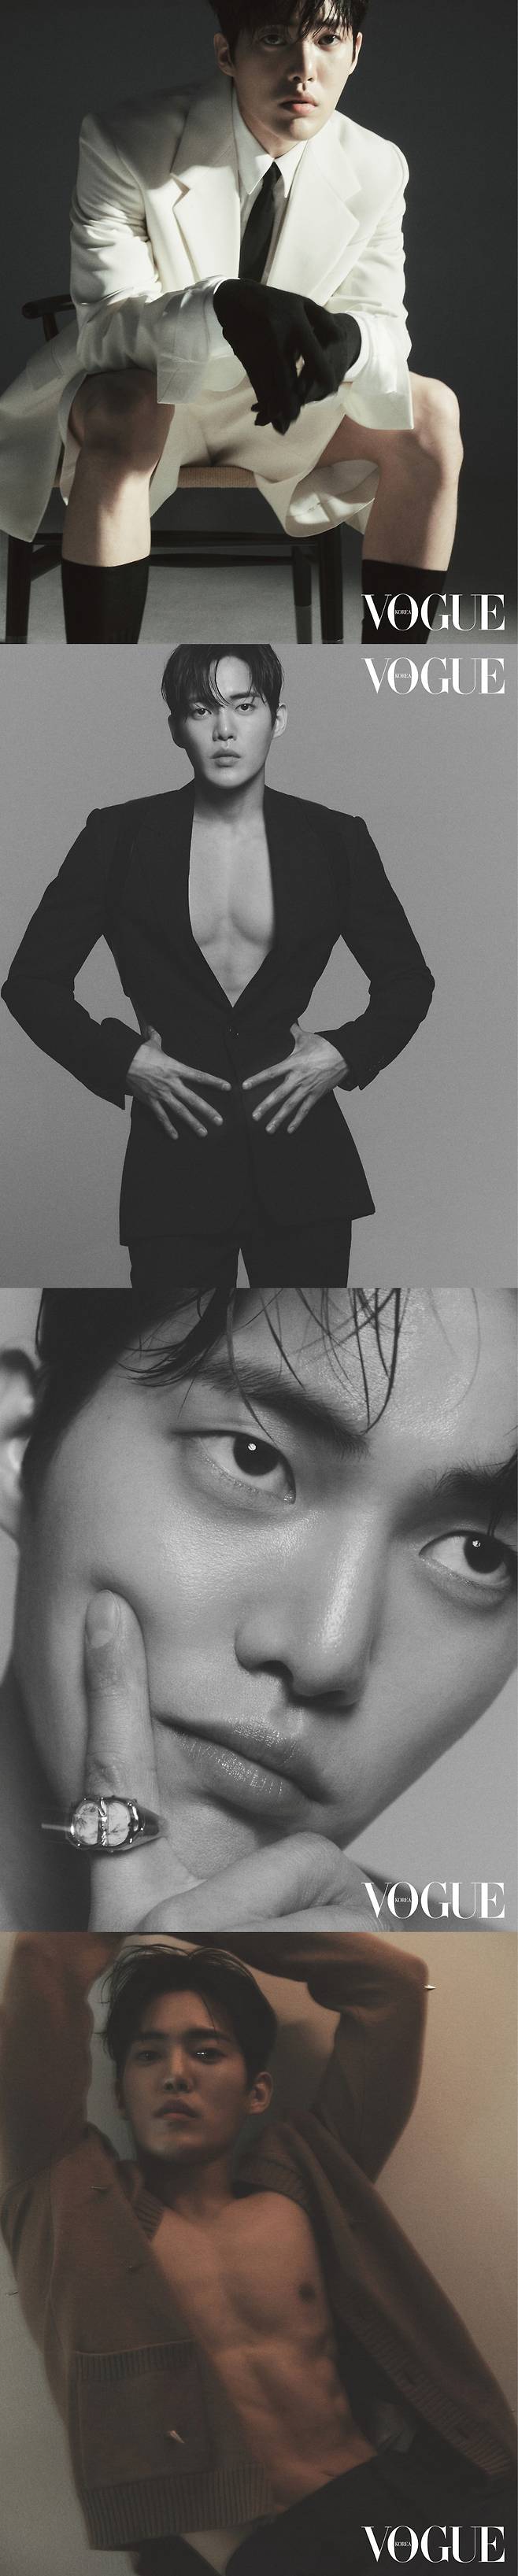 Kim Kun-Woo recently took a photo shoot with fashion magazine Vogue Korea.In this photo, Kim Kun-Woo has perfected the natural styling, the simple and dandy The Set-Up suit and the unique all-black The Set-Up with exposure, and has a professional pose as well as a dramatic emotional line With his eyes and facial expressions, he completed a variety of pictorials such as close-up, full body, black and white in his own mood, and he was impressed with his elongation.When asked why he chose the musical after The Gloria in an interview after the photo shoot, he said, I originally wanted to do the stage at the same time. I have a great desire for the stage, a longing, and a longing for it.As for the impression that I participated in the 10th anniversary performance of Days of the Day, Yoo Jun-sang, Ji Chang-wook and others are strong.Even though I am lagging behind, I am working on the idea that there will be freshness from the new members, he said. Respect for musical actors has grown tremendously. Especially, self-management is thorough.He also said that Kim Hee-rae, who worked together in The Gloria, gave advice. It was a lot of help to say that it was natural to act rather than sing.I do not have enough experience, but I encouraged him to do it with his charm and delivered coffee to the practice room. On the other hand, the musical Days of the Day is a jukebox musical composed of famous songs sung by Kim Kwang-seok, an eternal guest who covers the mysterious events of the day that disappeared 20 years ago, It is a work that won the praise of the audience and won a total of 11 awards in the domestic musical awards ceremony.In addition, it is a long-established creative musical that has exceeded the cumulative audience of 550,000 people. It is the 10th anniversary of the historic 10th anniversary of this season. Yoo Jun-sang, Lee Kun-myung, Oh Man-seok, Kim Kun-Woo, Gifted, She Kim Ji-hyun, Choi Seo-yeon, Jaymin, Seo Hyun-chul of Operation Hall, Lee Jung-yeol and Ko Chang-seok.